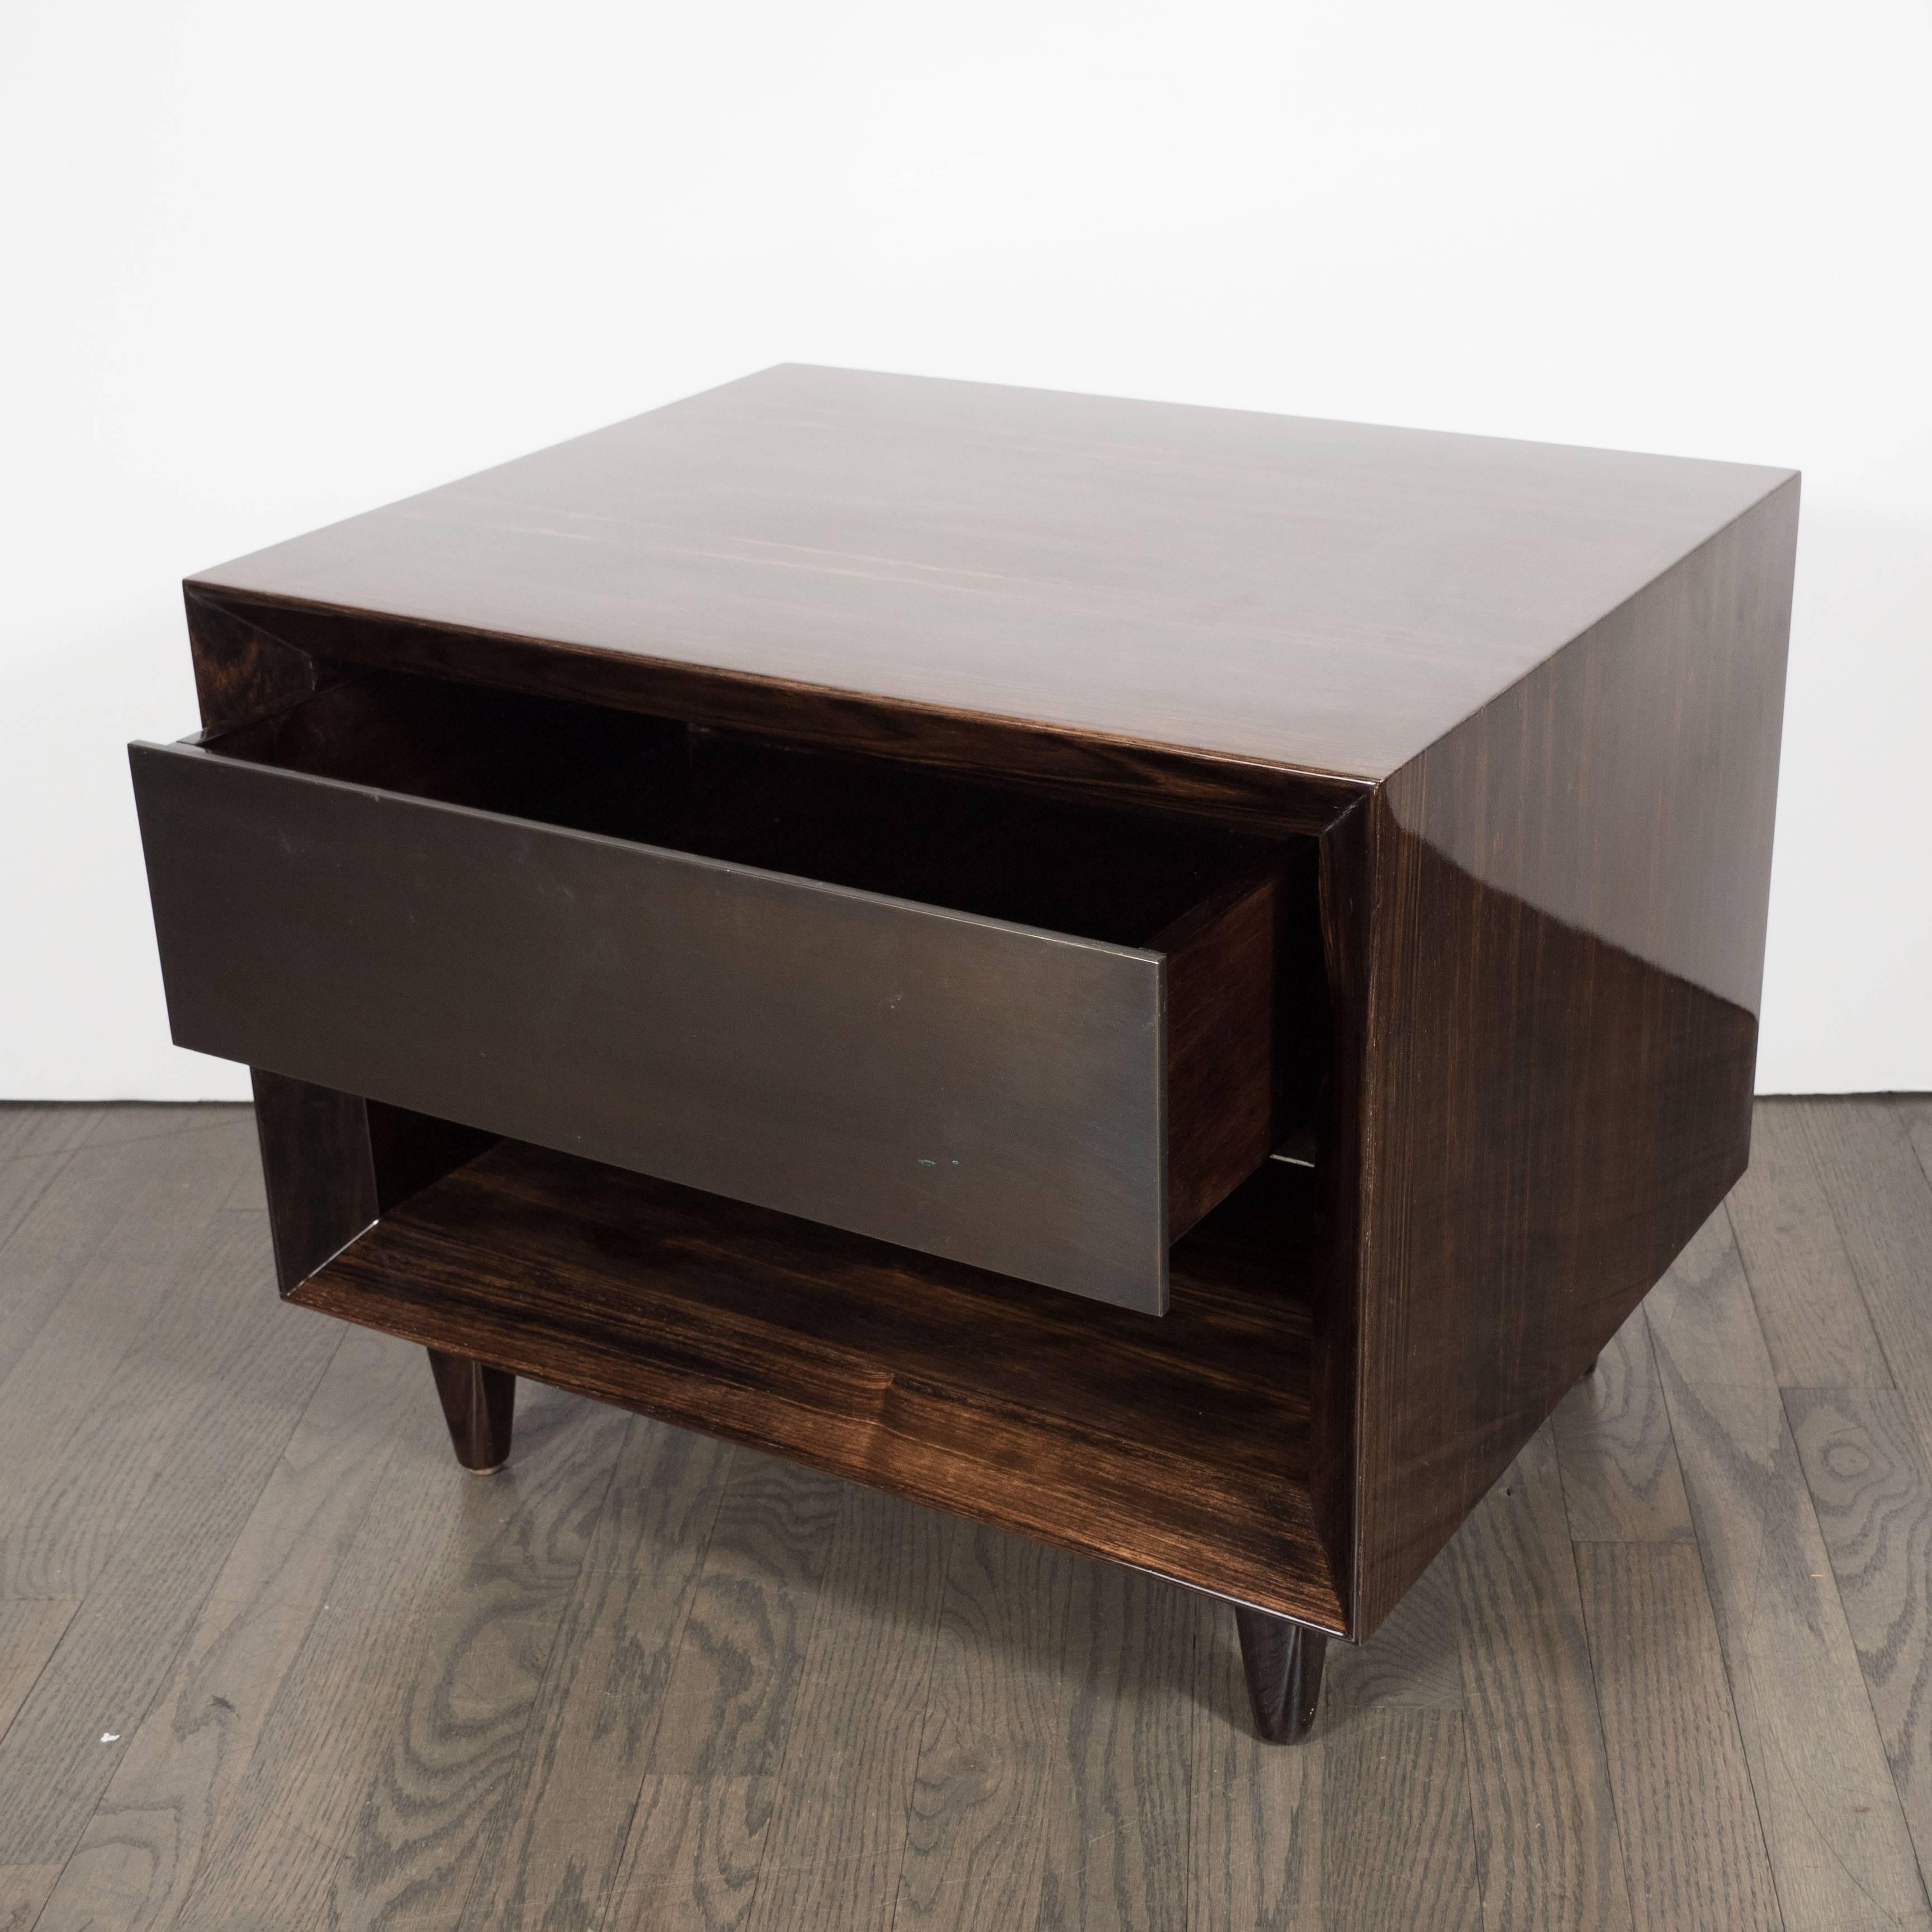 20th Century Pair of Modernist Macassar Nightstands / End Tables with Bronze Paneled Drawers For Sale